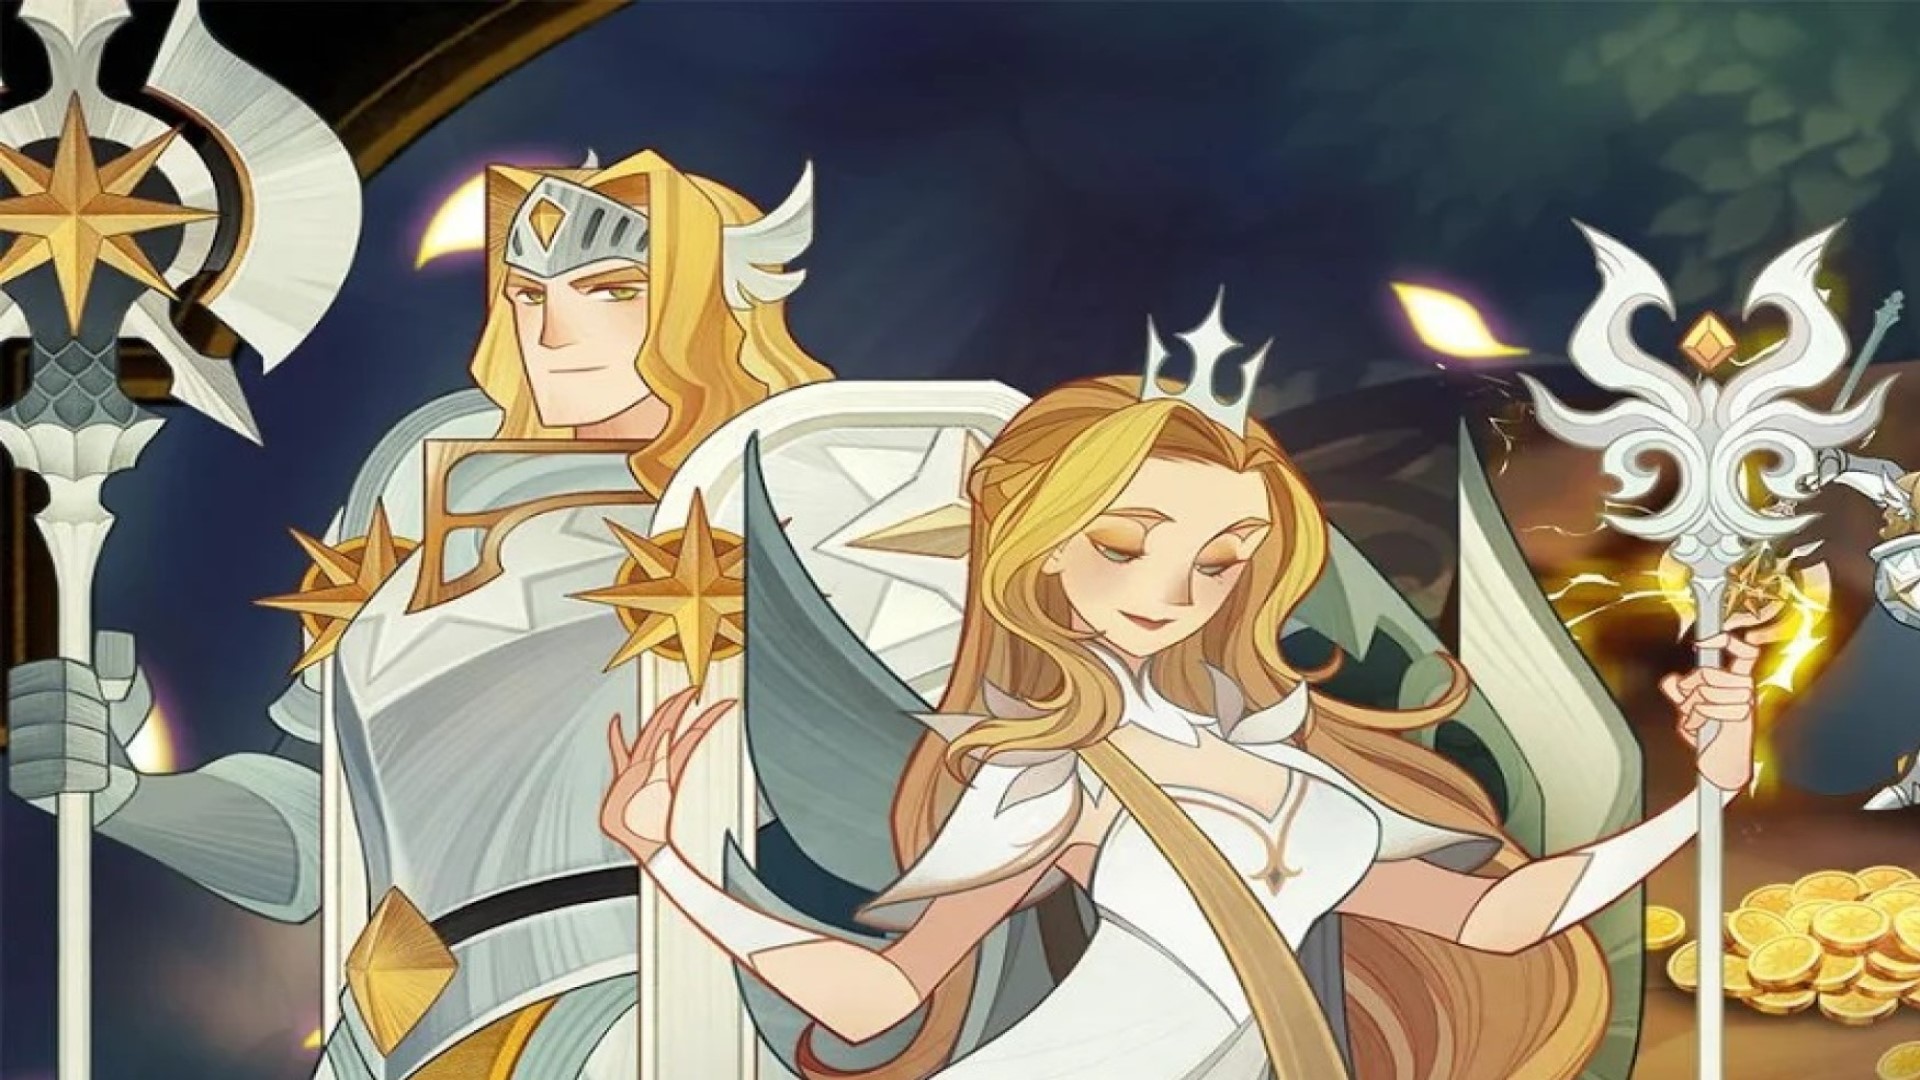 Best idle games: AFK Arena. Image shows two people with long blonde hair and magical staffs.